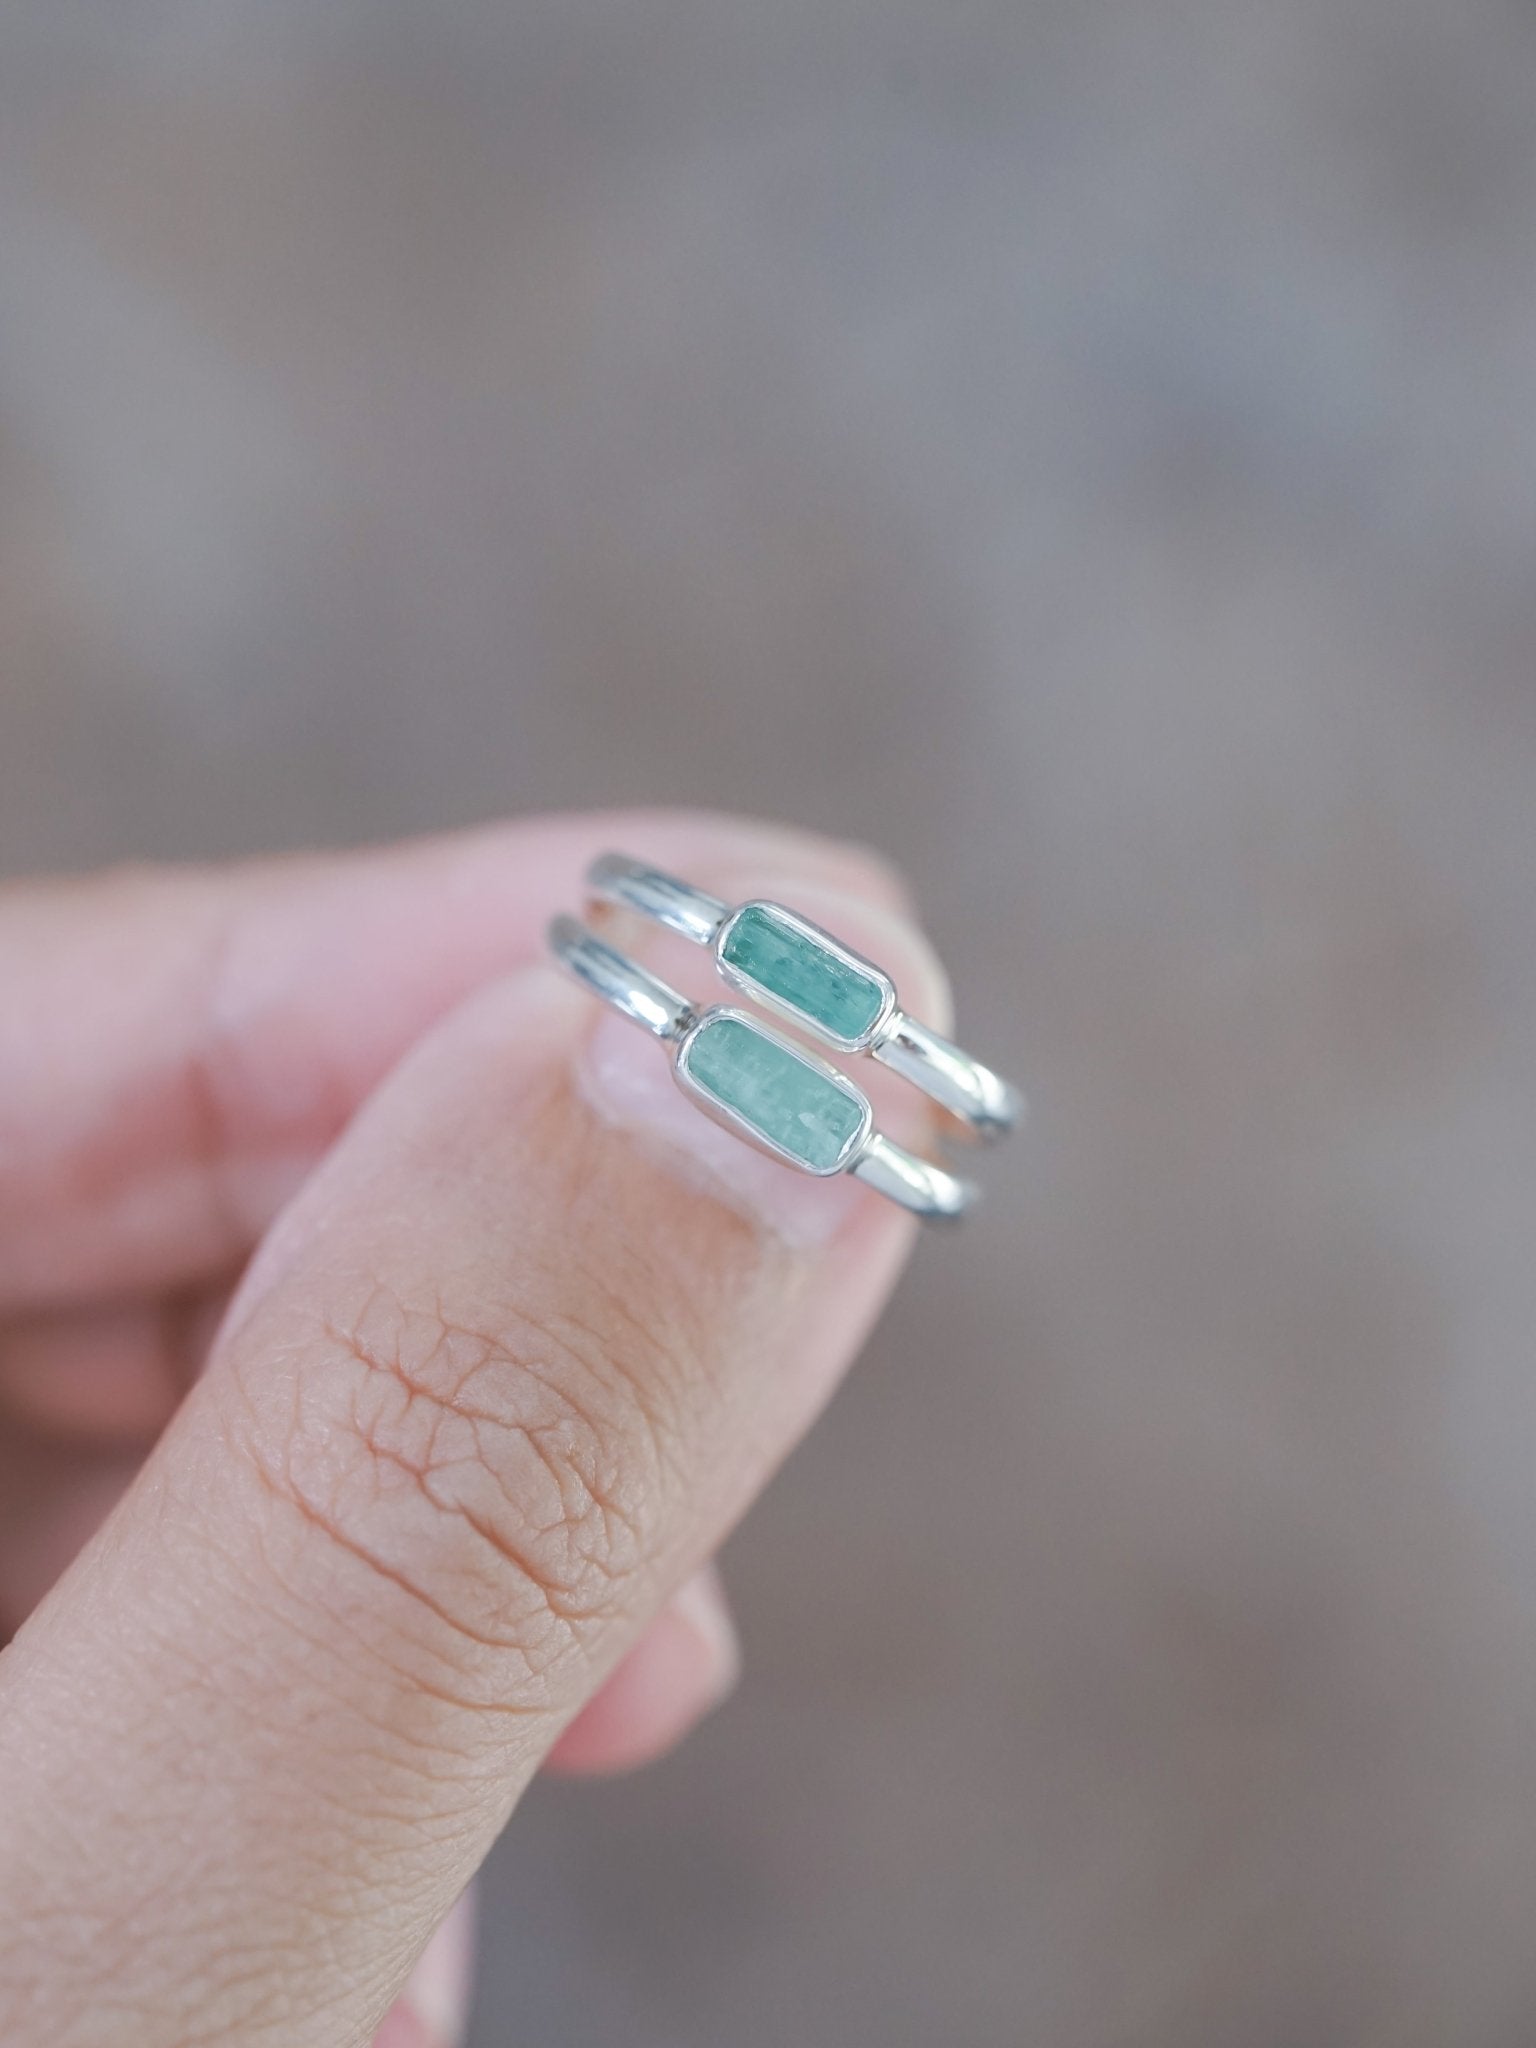 What You Need to Know About Aquamarine Engagement Rings